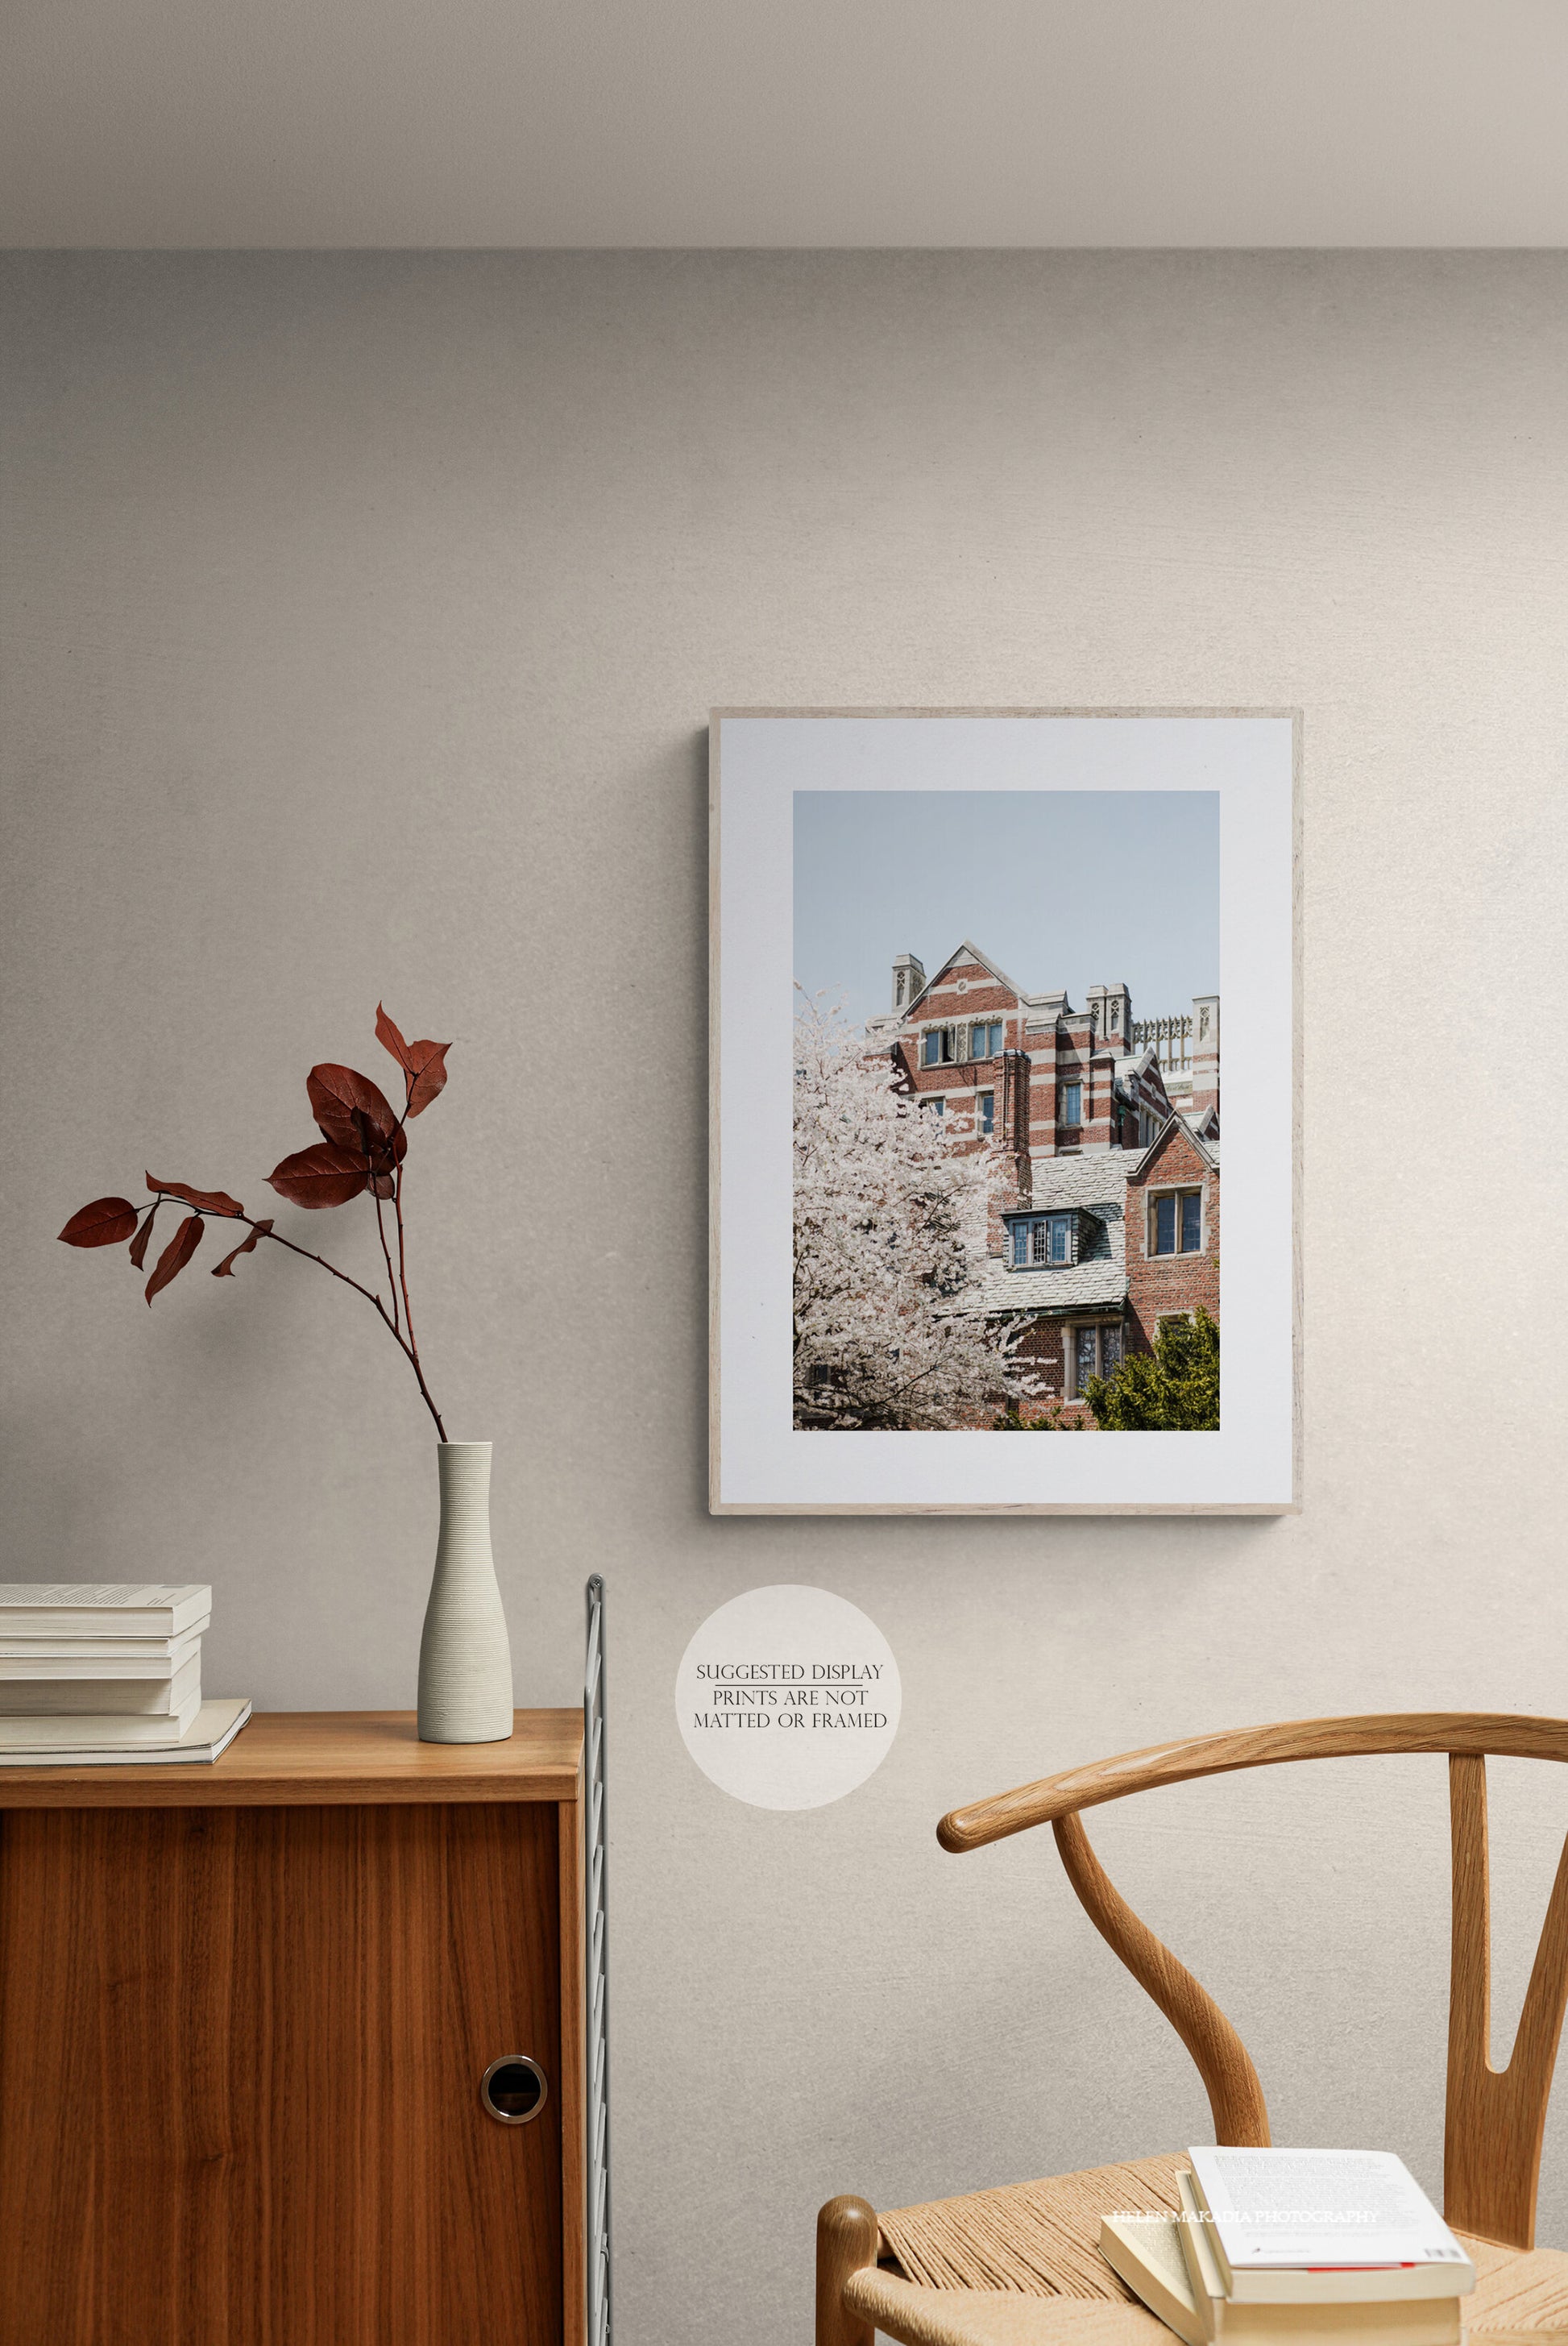 Severance and Tower Court Halls in Springtime Photograph as Framed Wall Art in an Entryway 